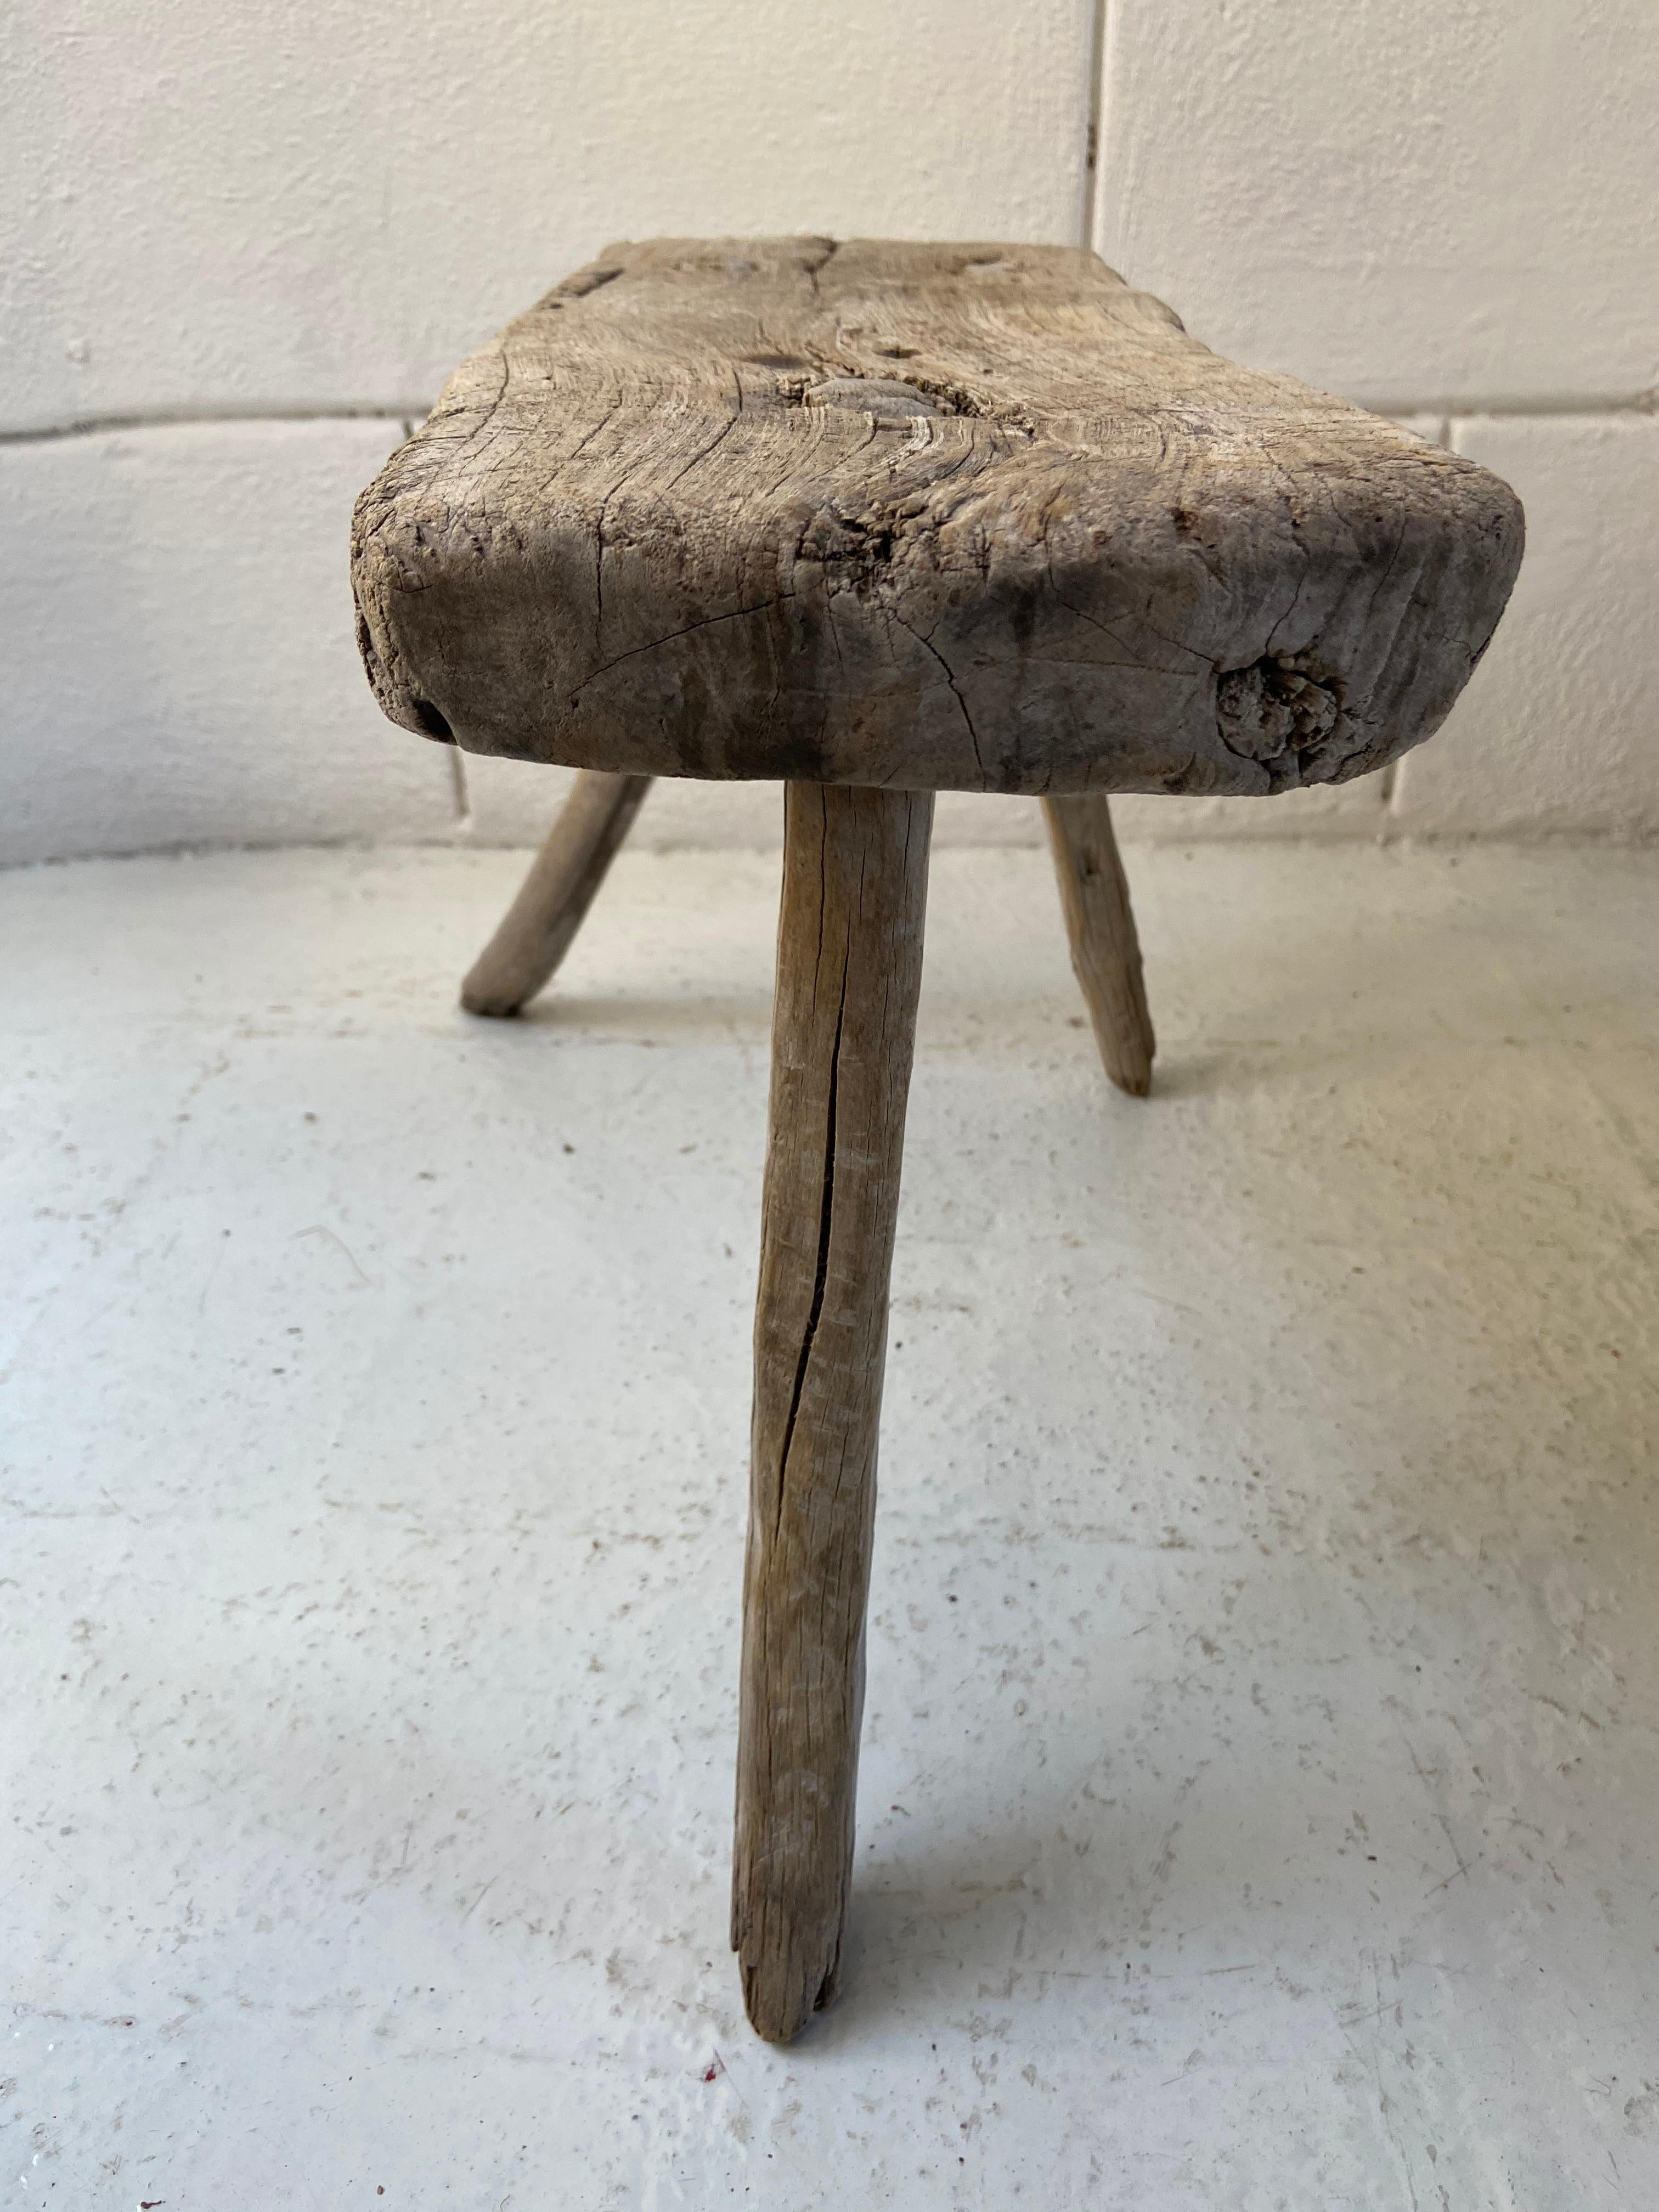 Hand-Carved Primitive Hardwood Stool from Mexico